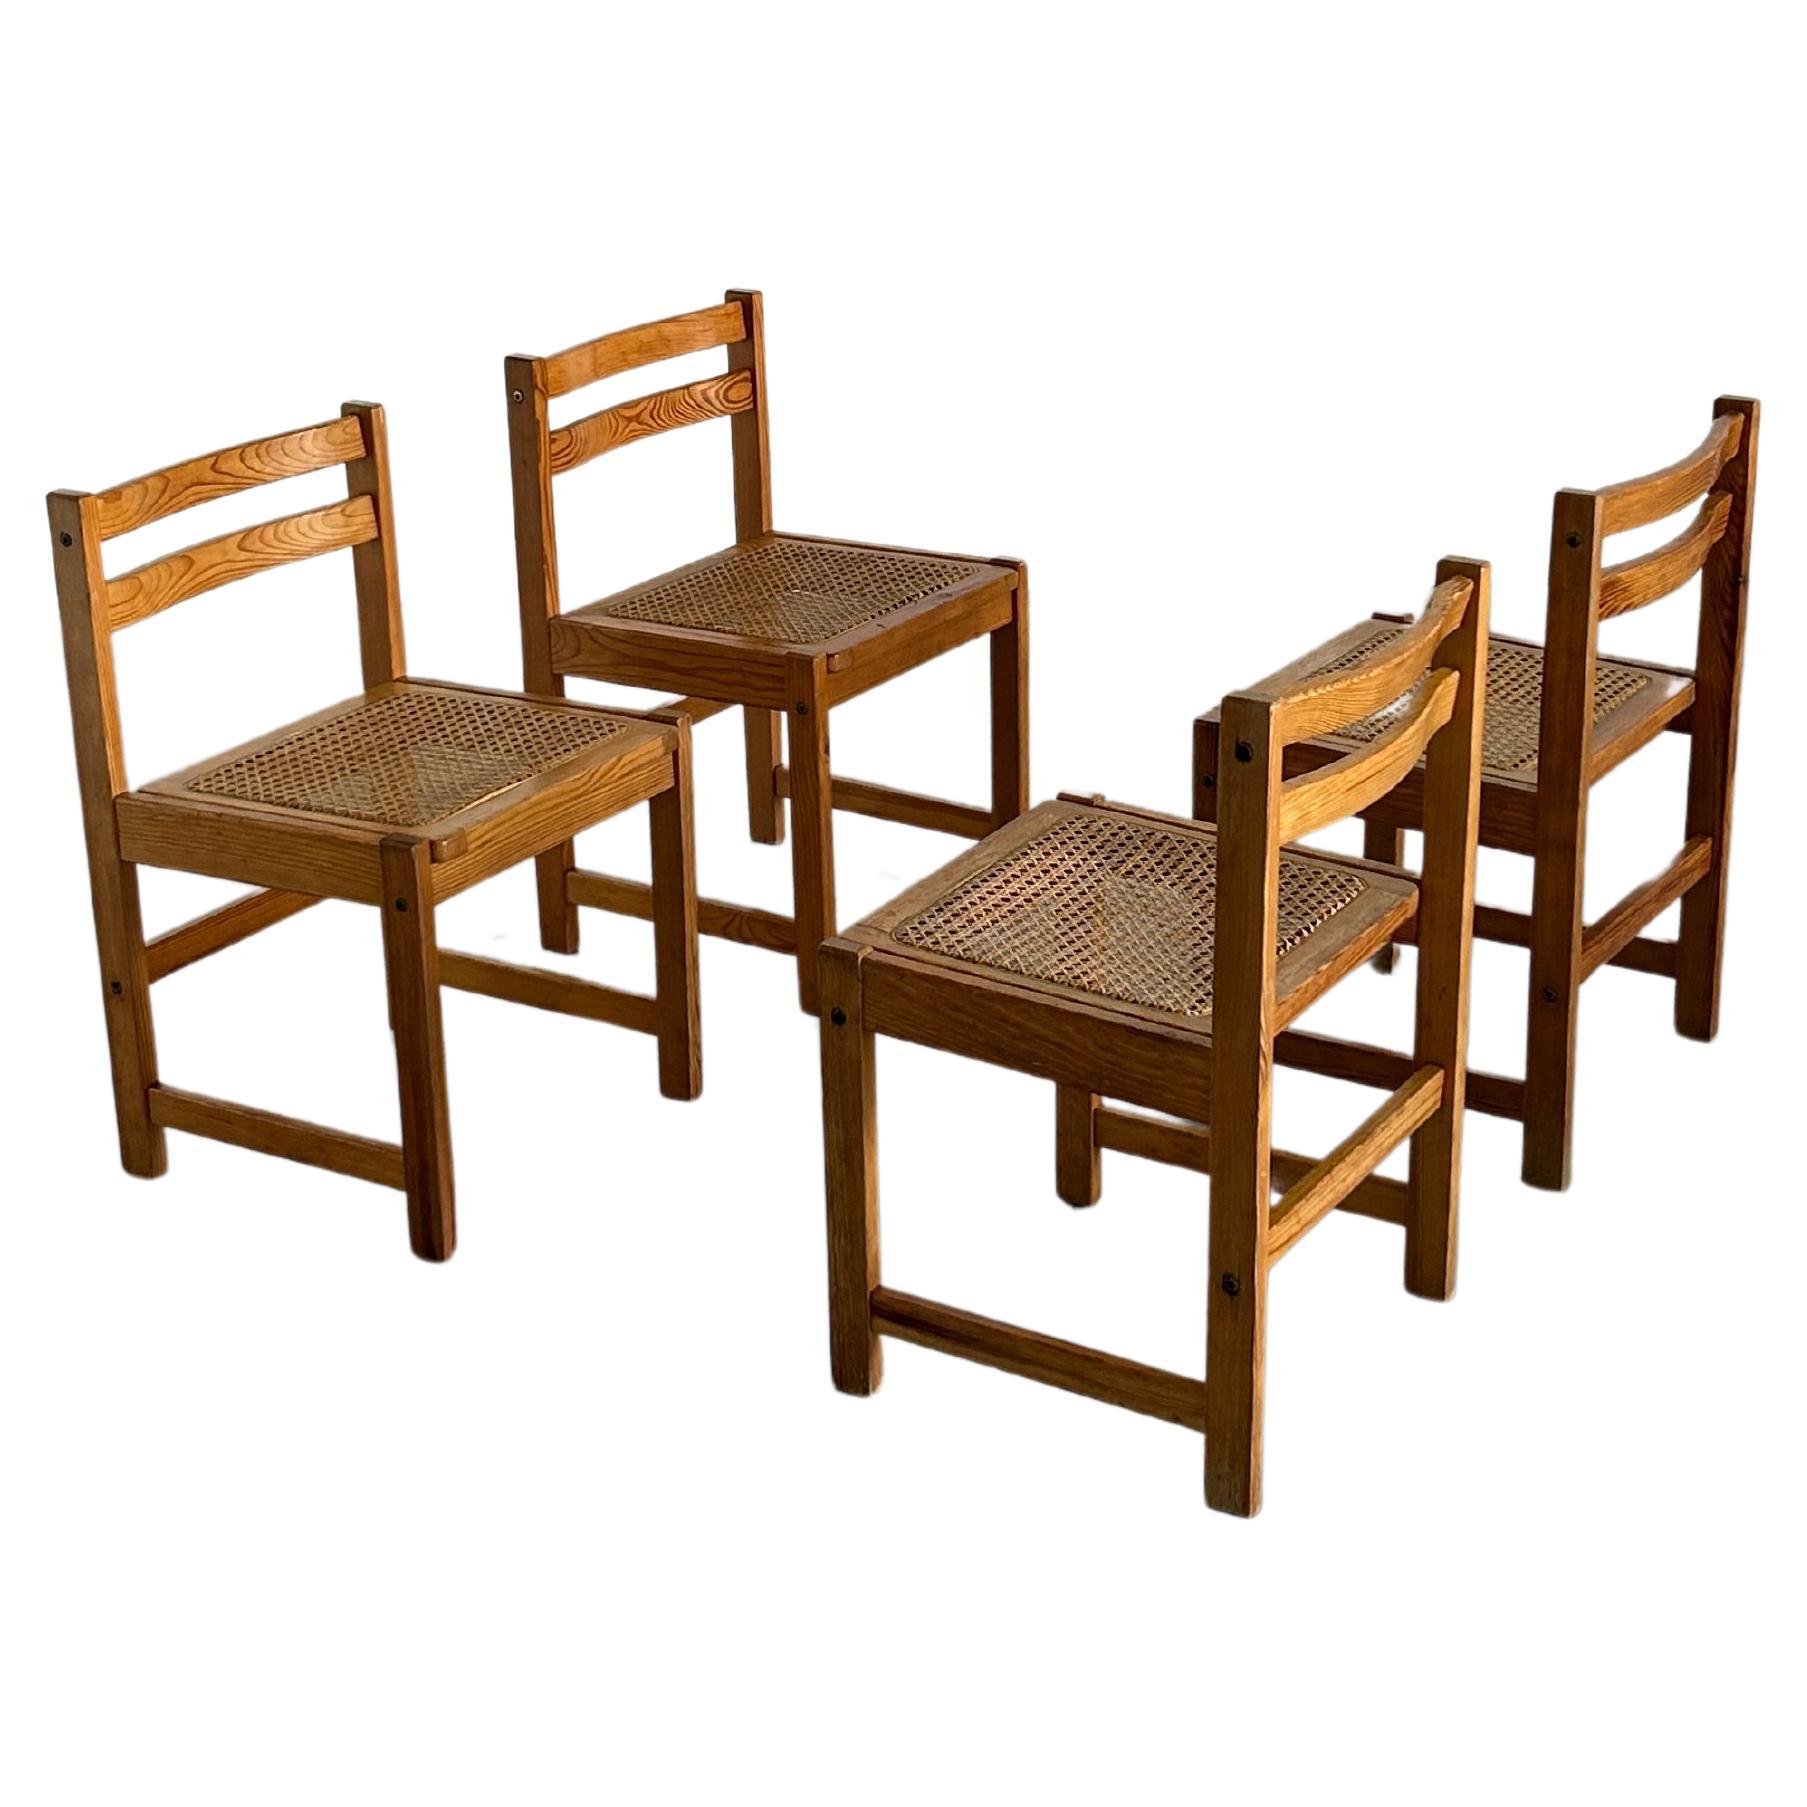 Set of 4 Vintage Mid-Century Modern Wooden Dining Chairs in Beech and Cane, 60s